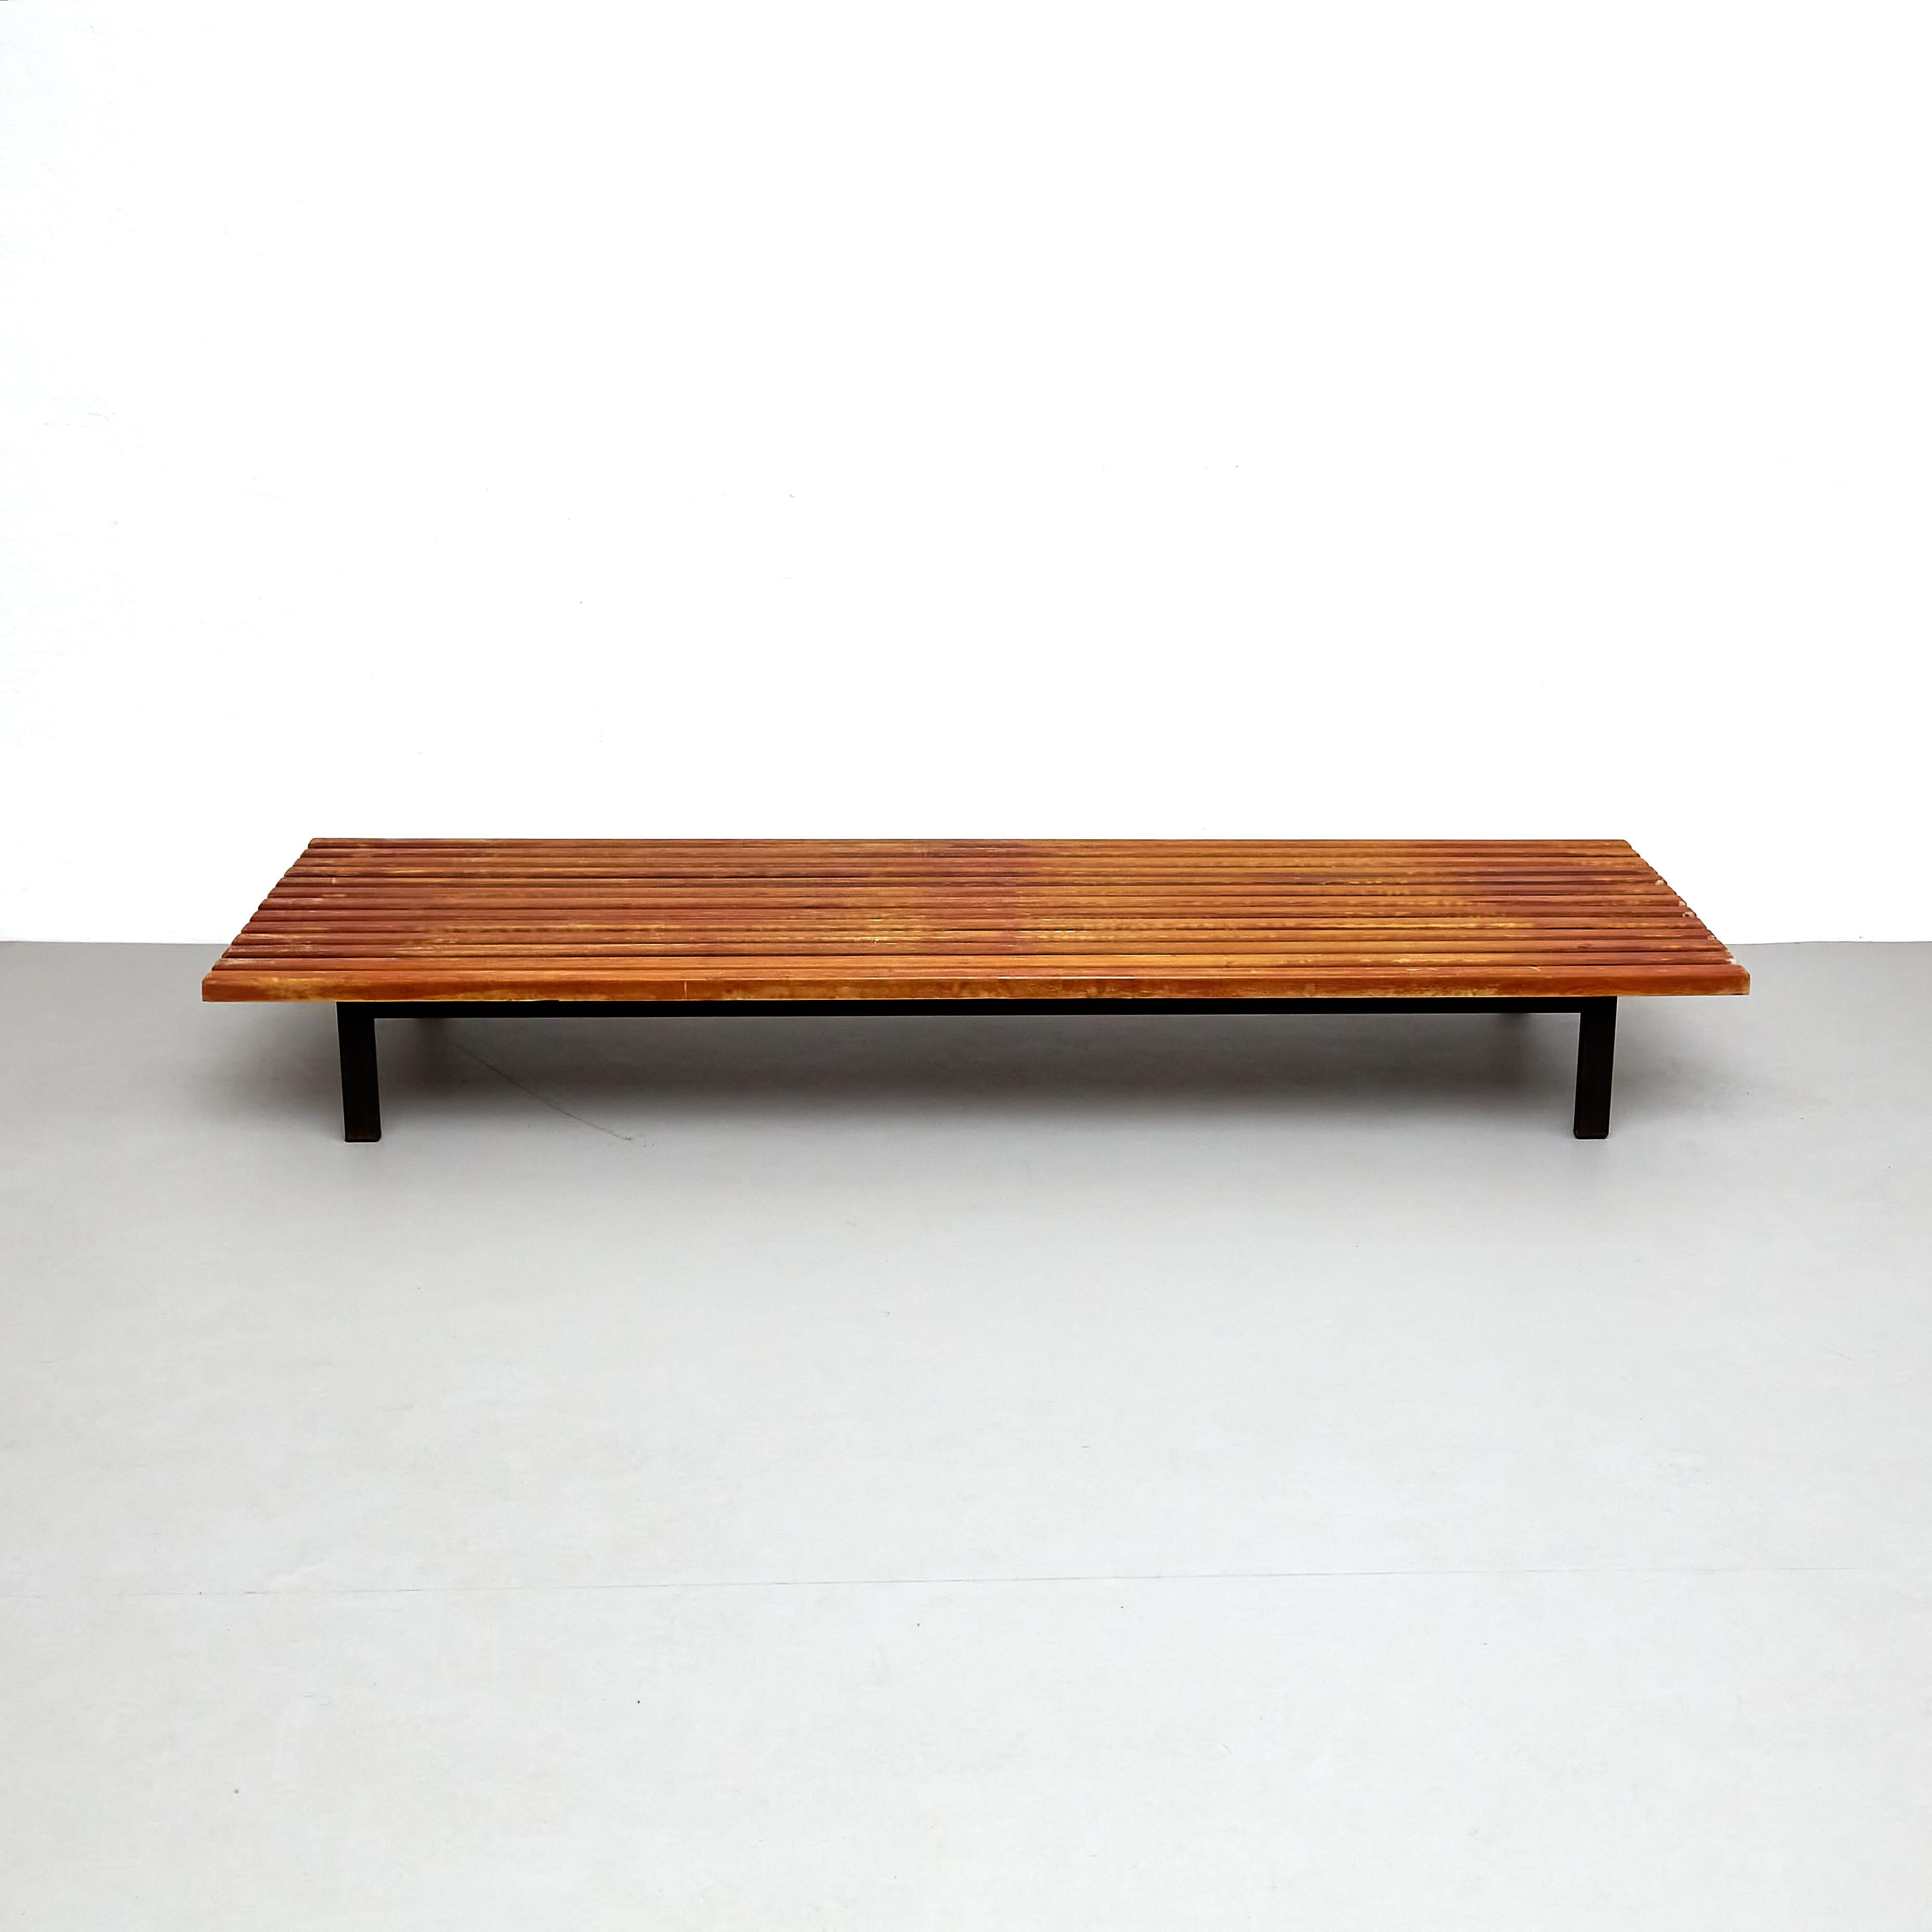 This Charlotte Perriand Cansado bench is a rare and exceptional piece that was designed by the iconic French architect and designer Charlotte Perriand. The bench was edited by Steph Simon and has a provenance of Cansado, Mauritania (Africa). The